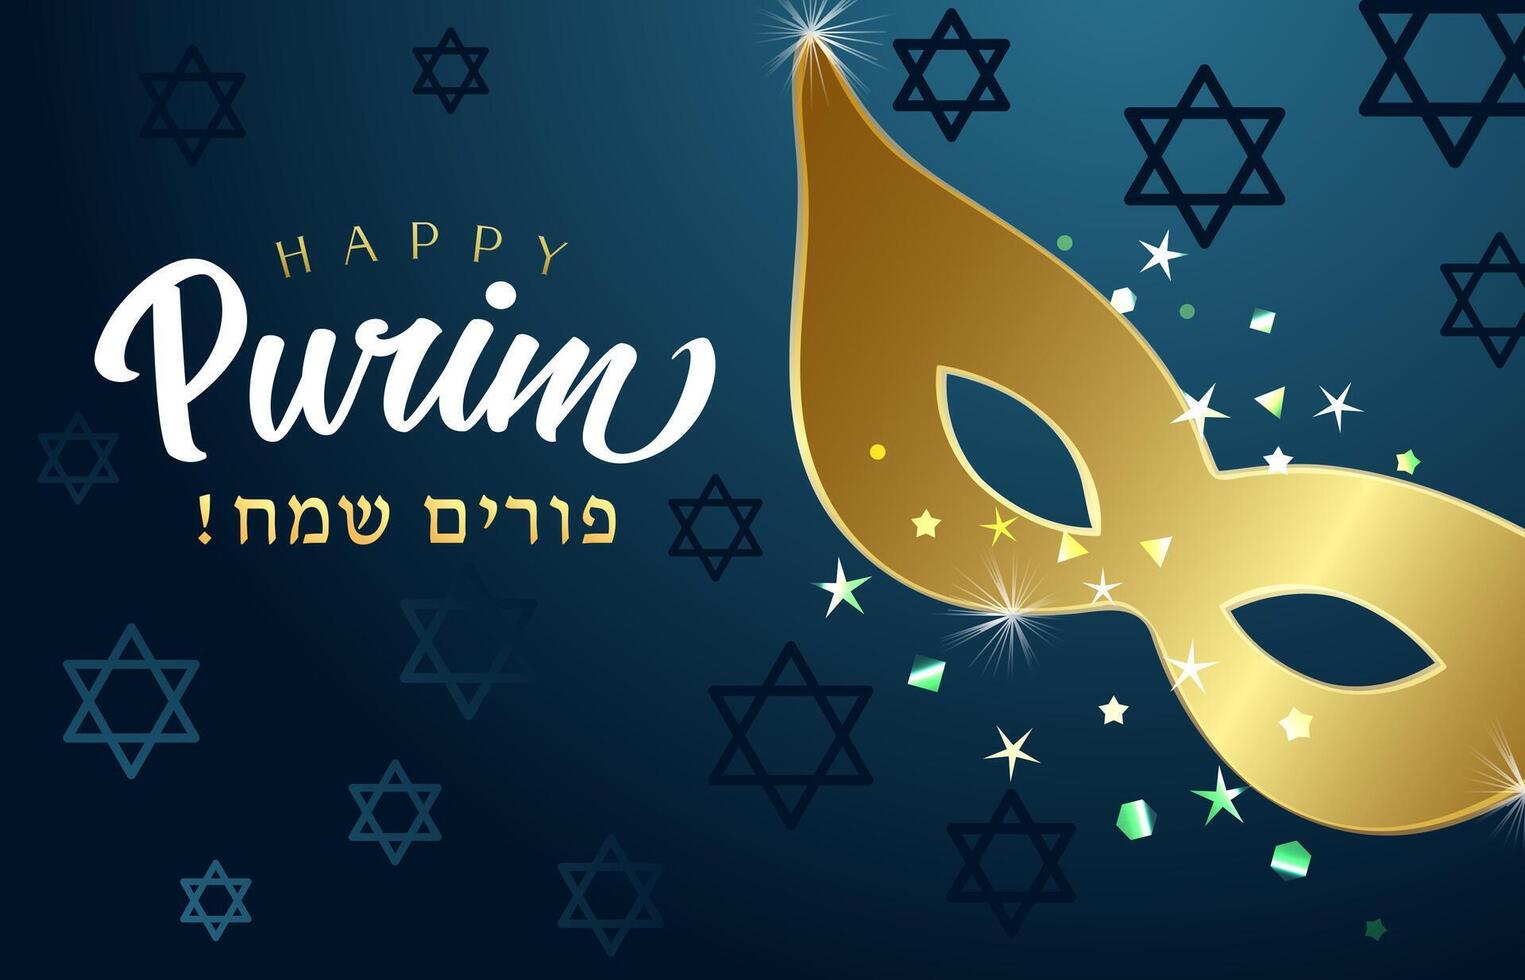 Purim congrats with golden face mask and holiday background vector